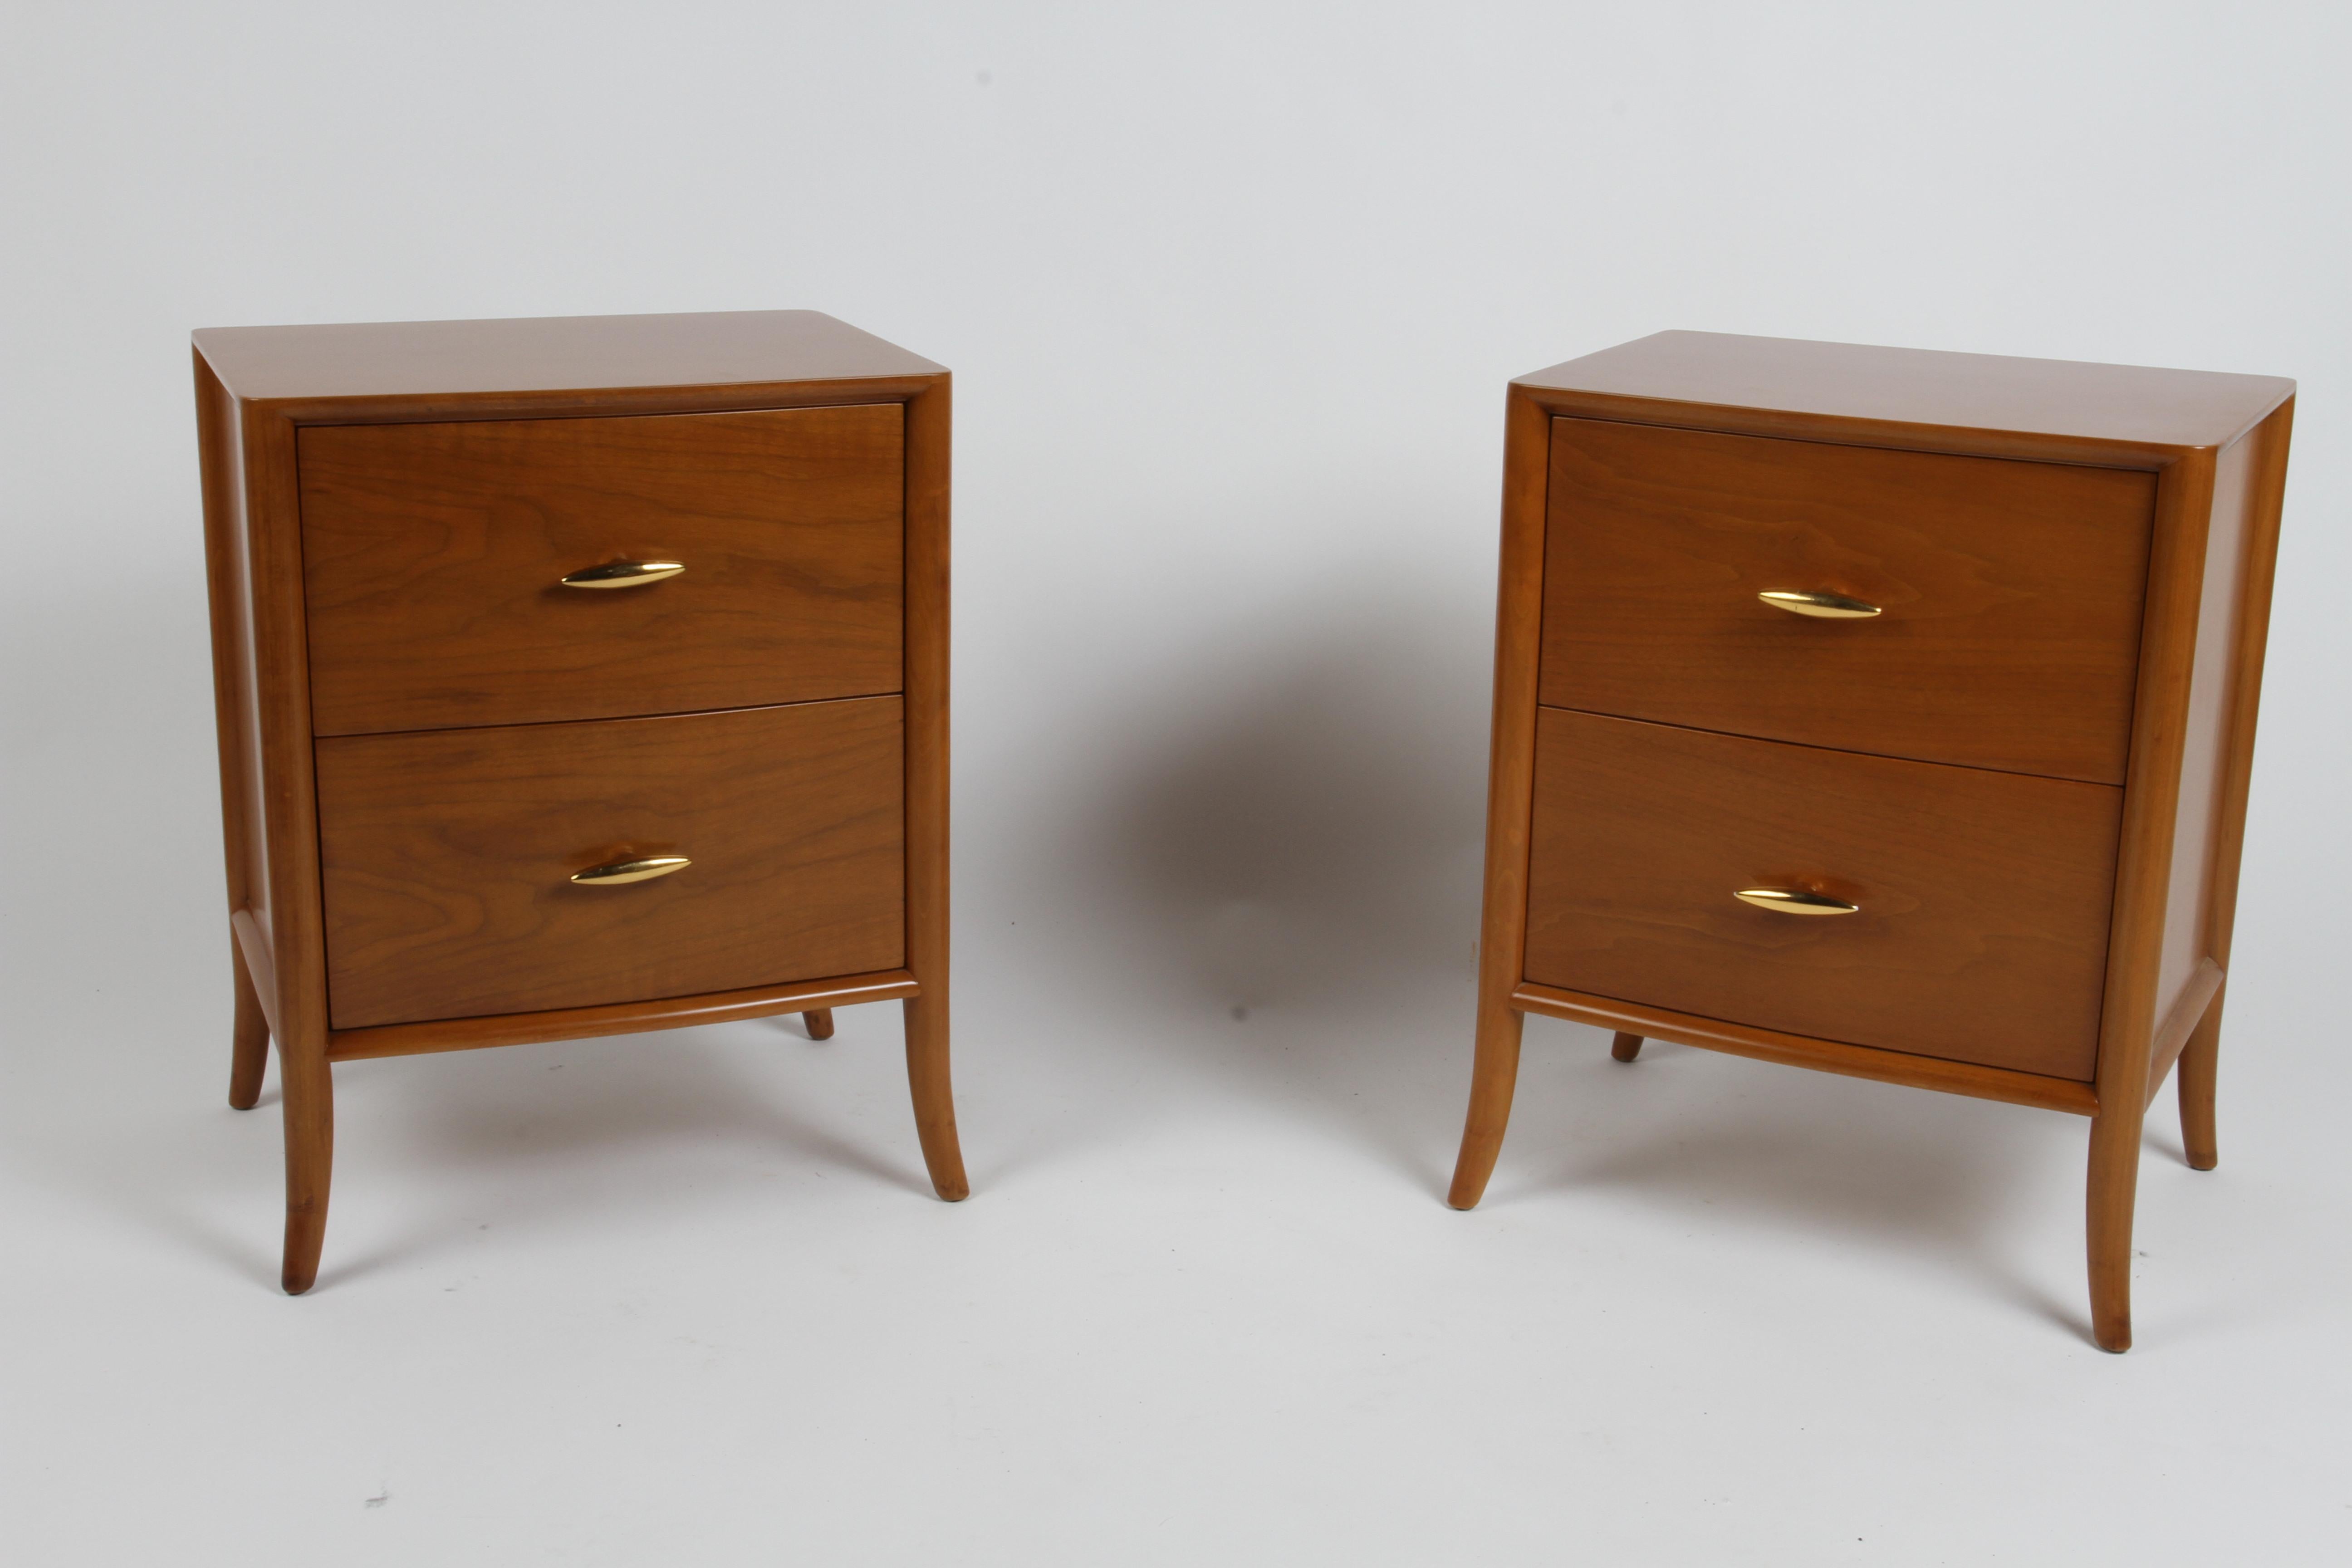 Pair of elegant and not often seen T. H. Robsjohn-Gibbings two drawer nightstands or end tables with serpentine front for Widdicomb, walnut veneer refinished to original color on splayed legs, drawers having 22-carat gold porcelain handles. Light